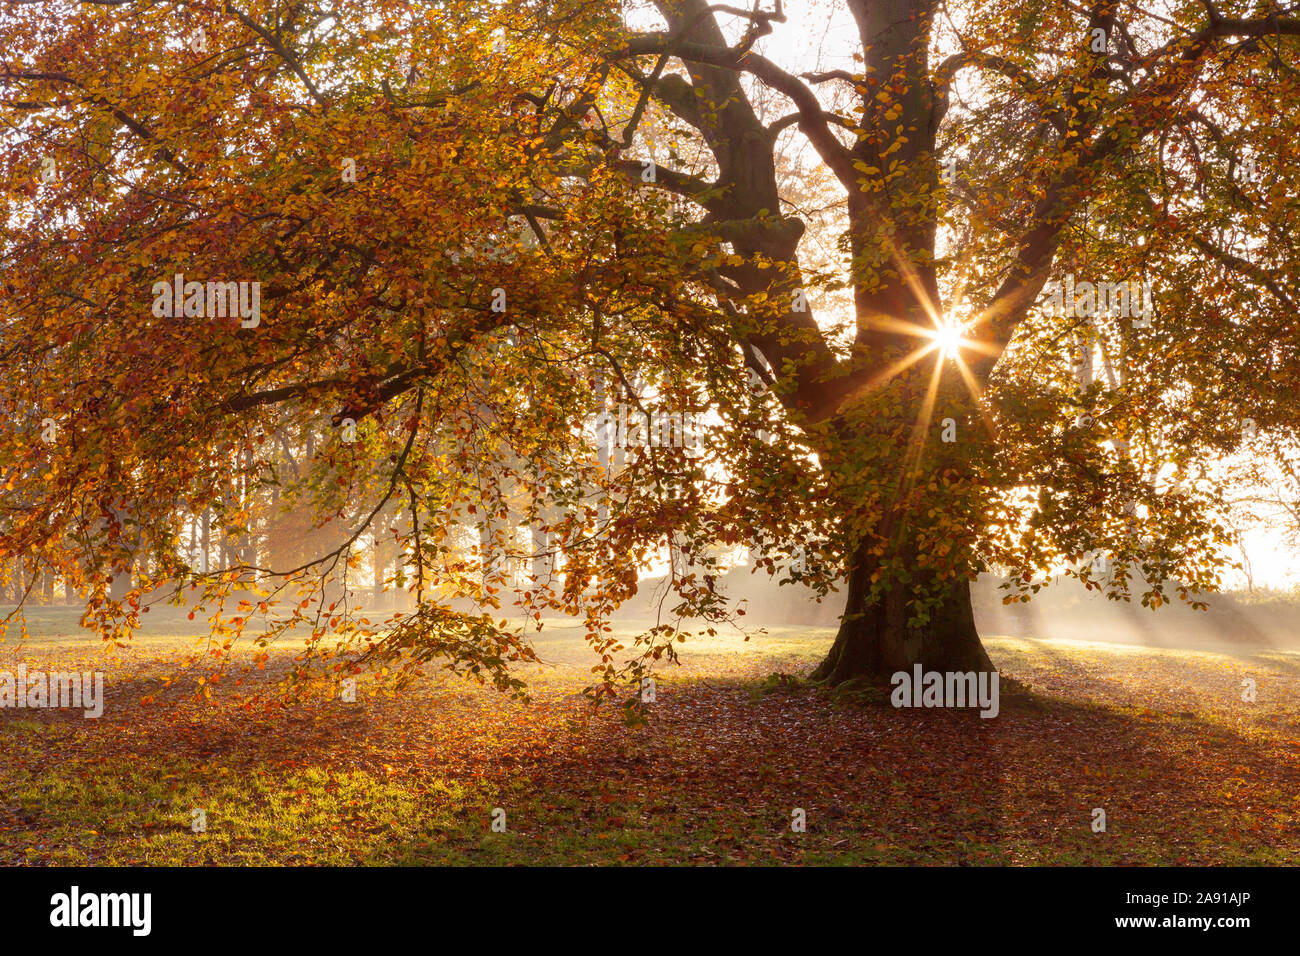 Barton-upon-Humber, North Lincolnshire, UK. 9th November 2019. UK Weather: A Beech tree in Baysgarth Park on a misty Autumn morning in November. Stock Photo